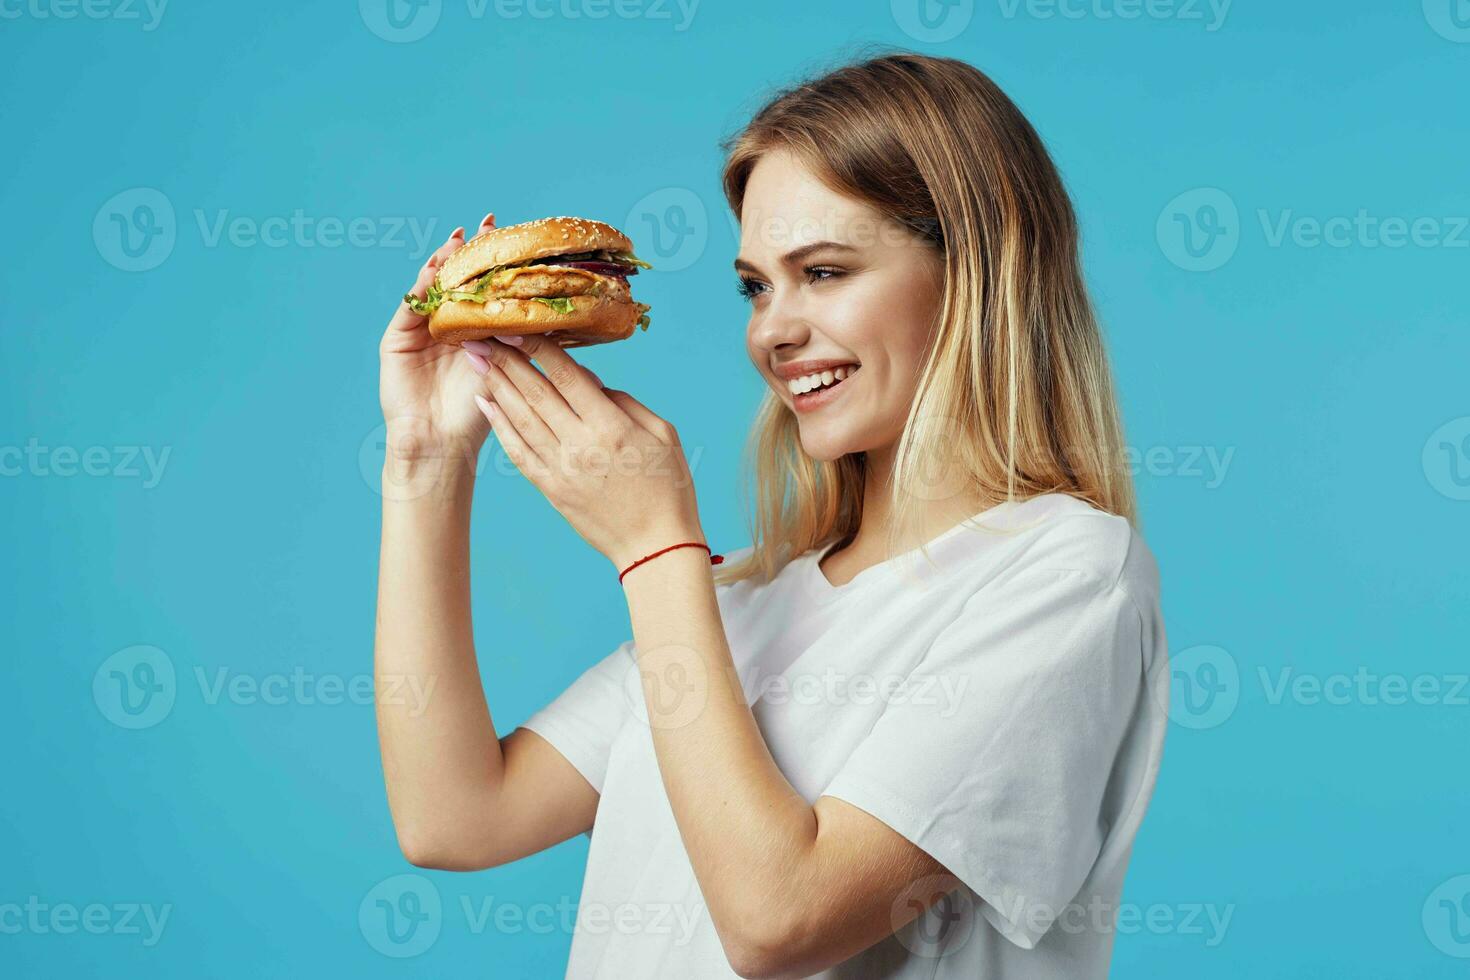 woman with hamburger fast food delivery snack fun blue background photo